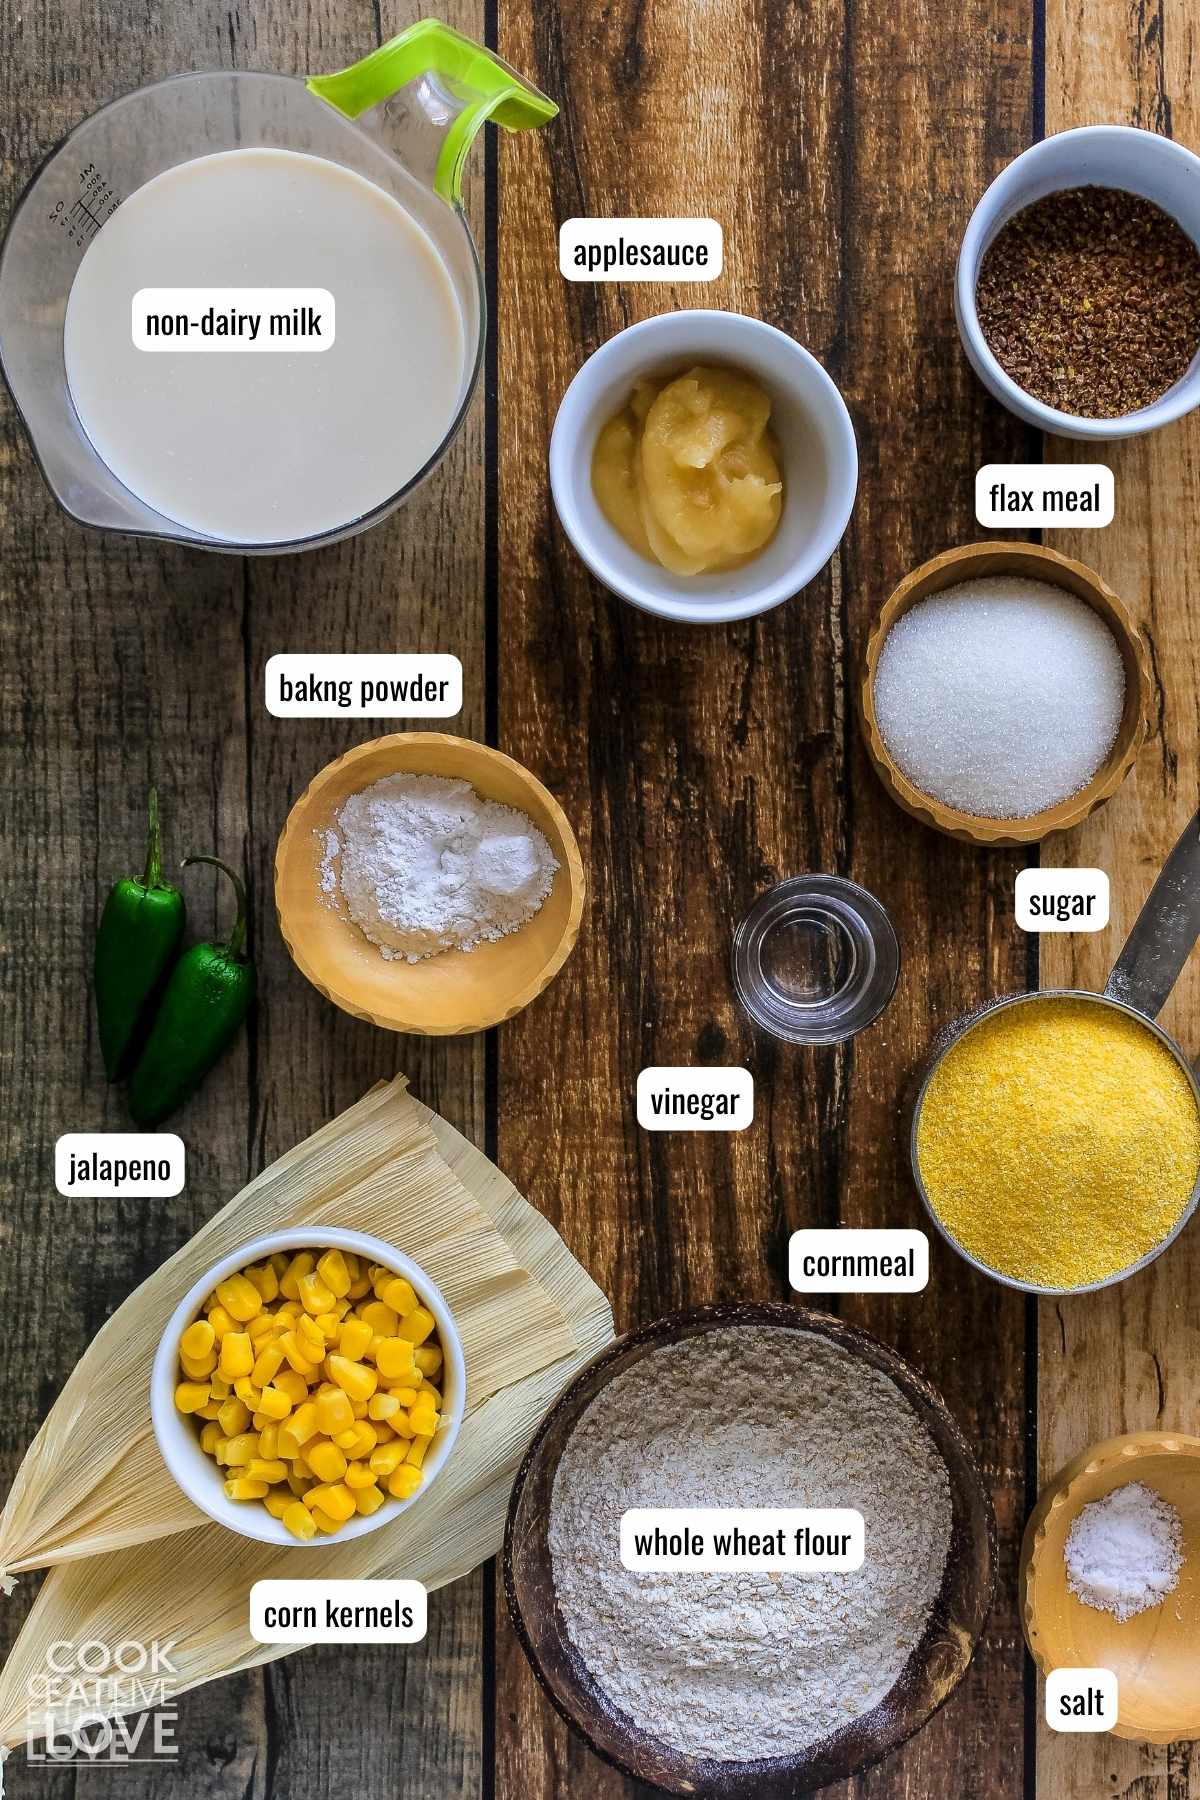 Ingredients with labels to make egg free cornbread on the table before mixing.